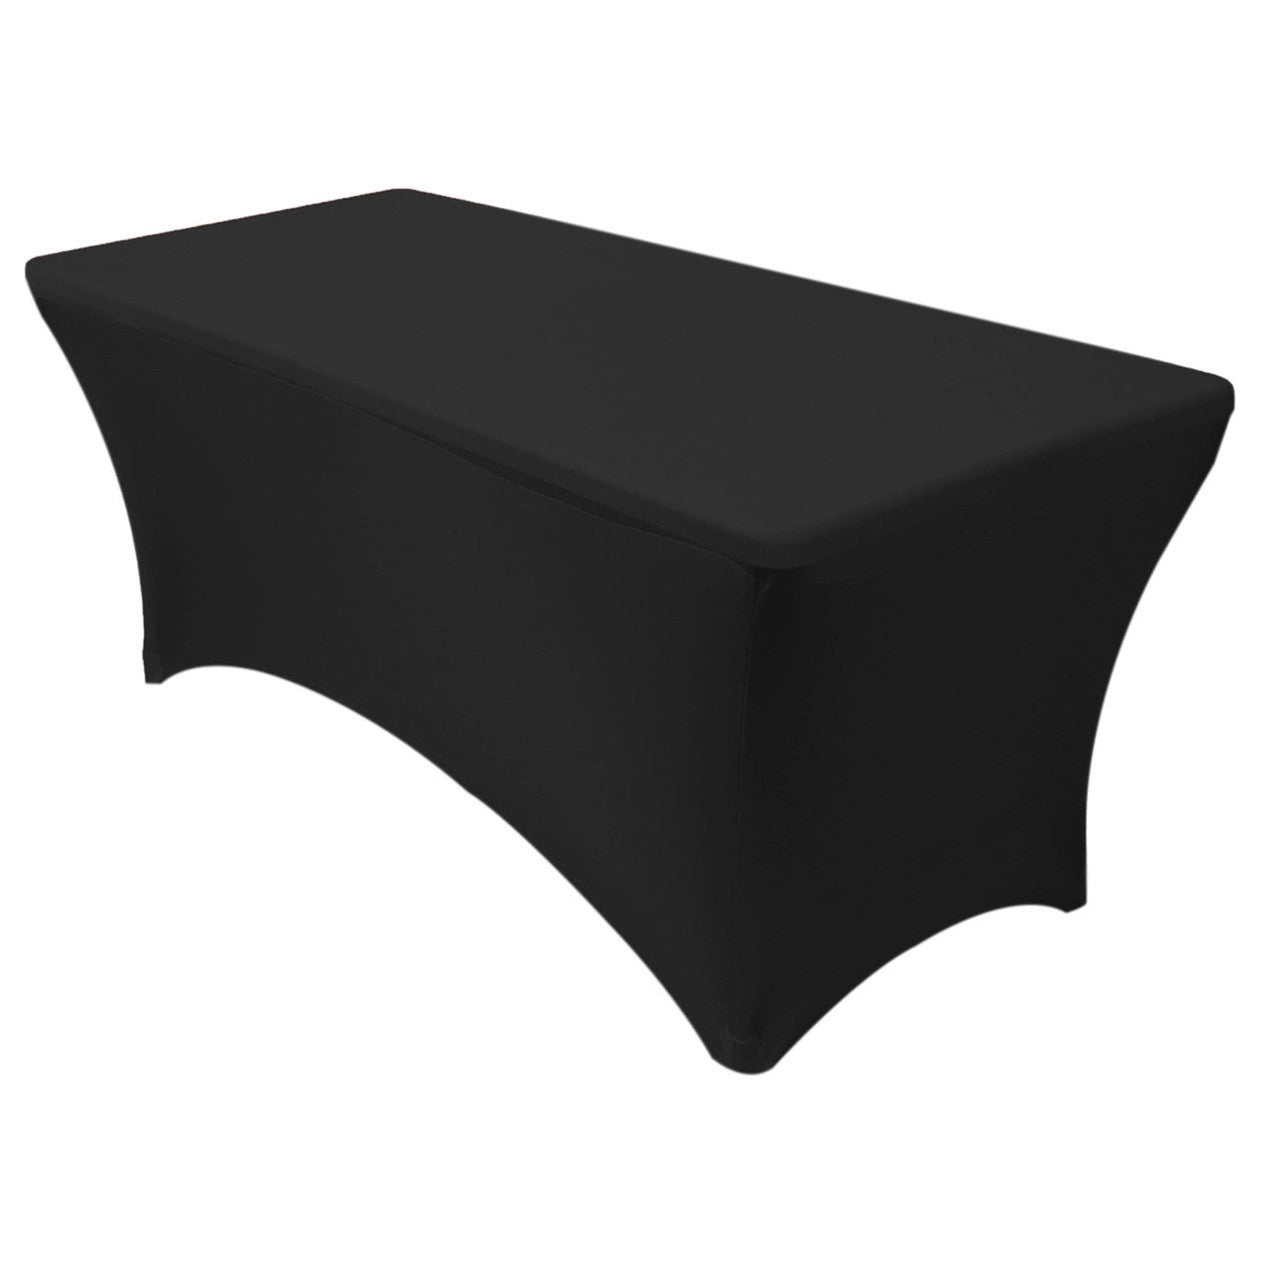 Spandex banquet table covers - Rowe Events